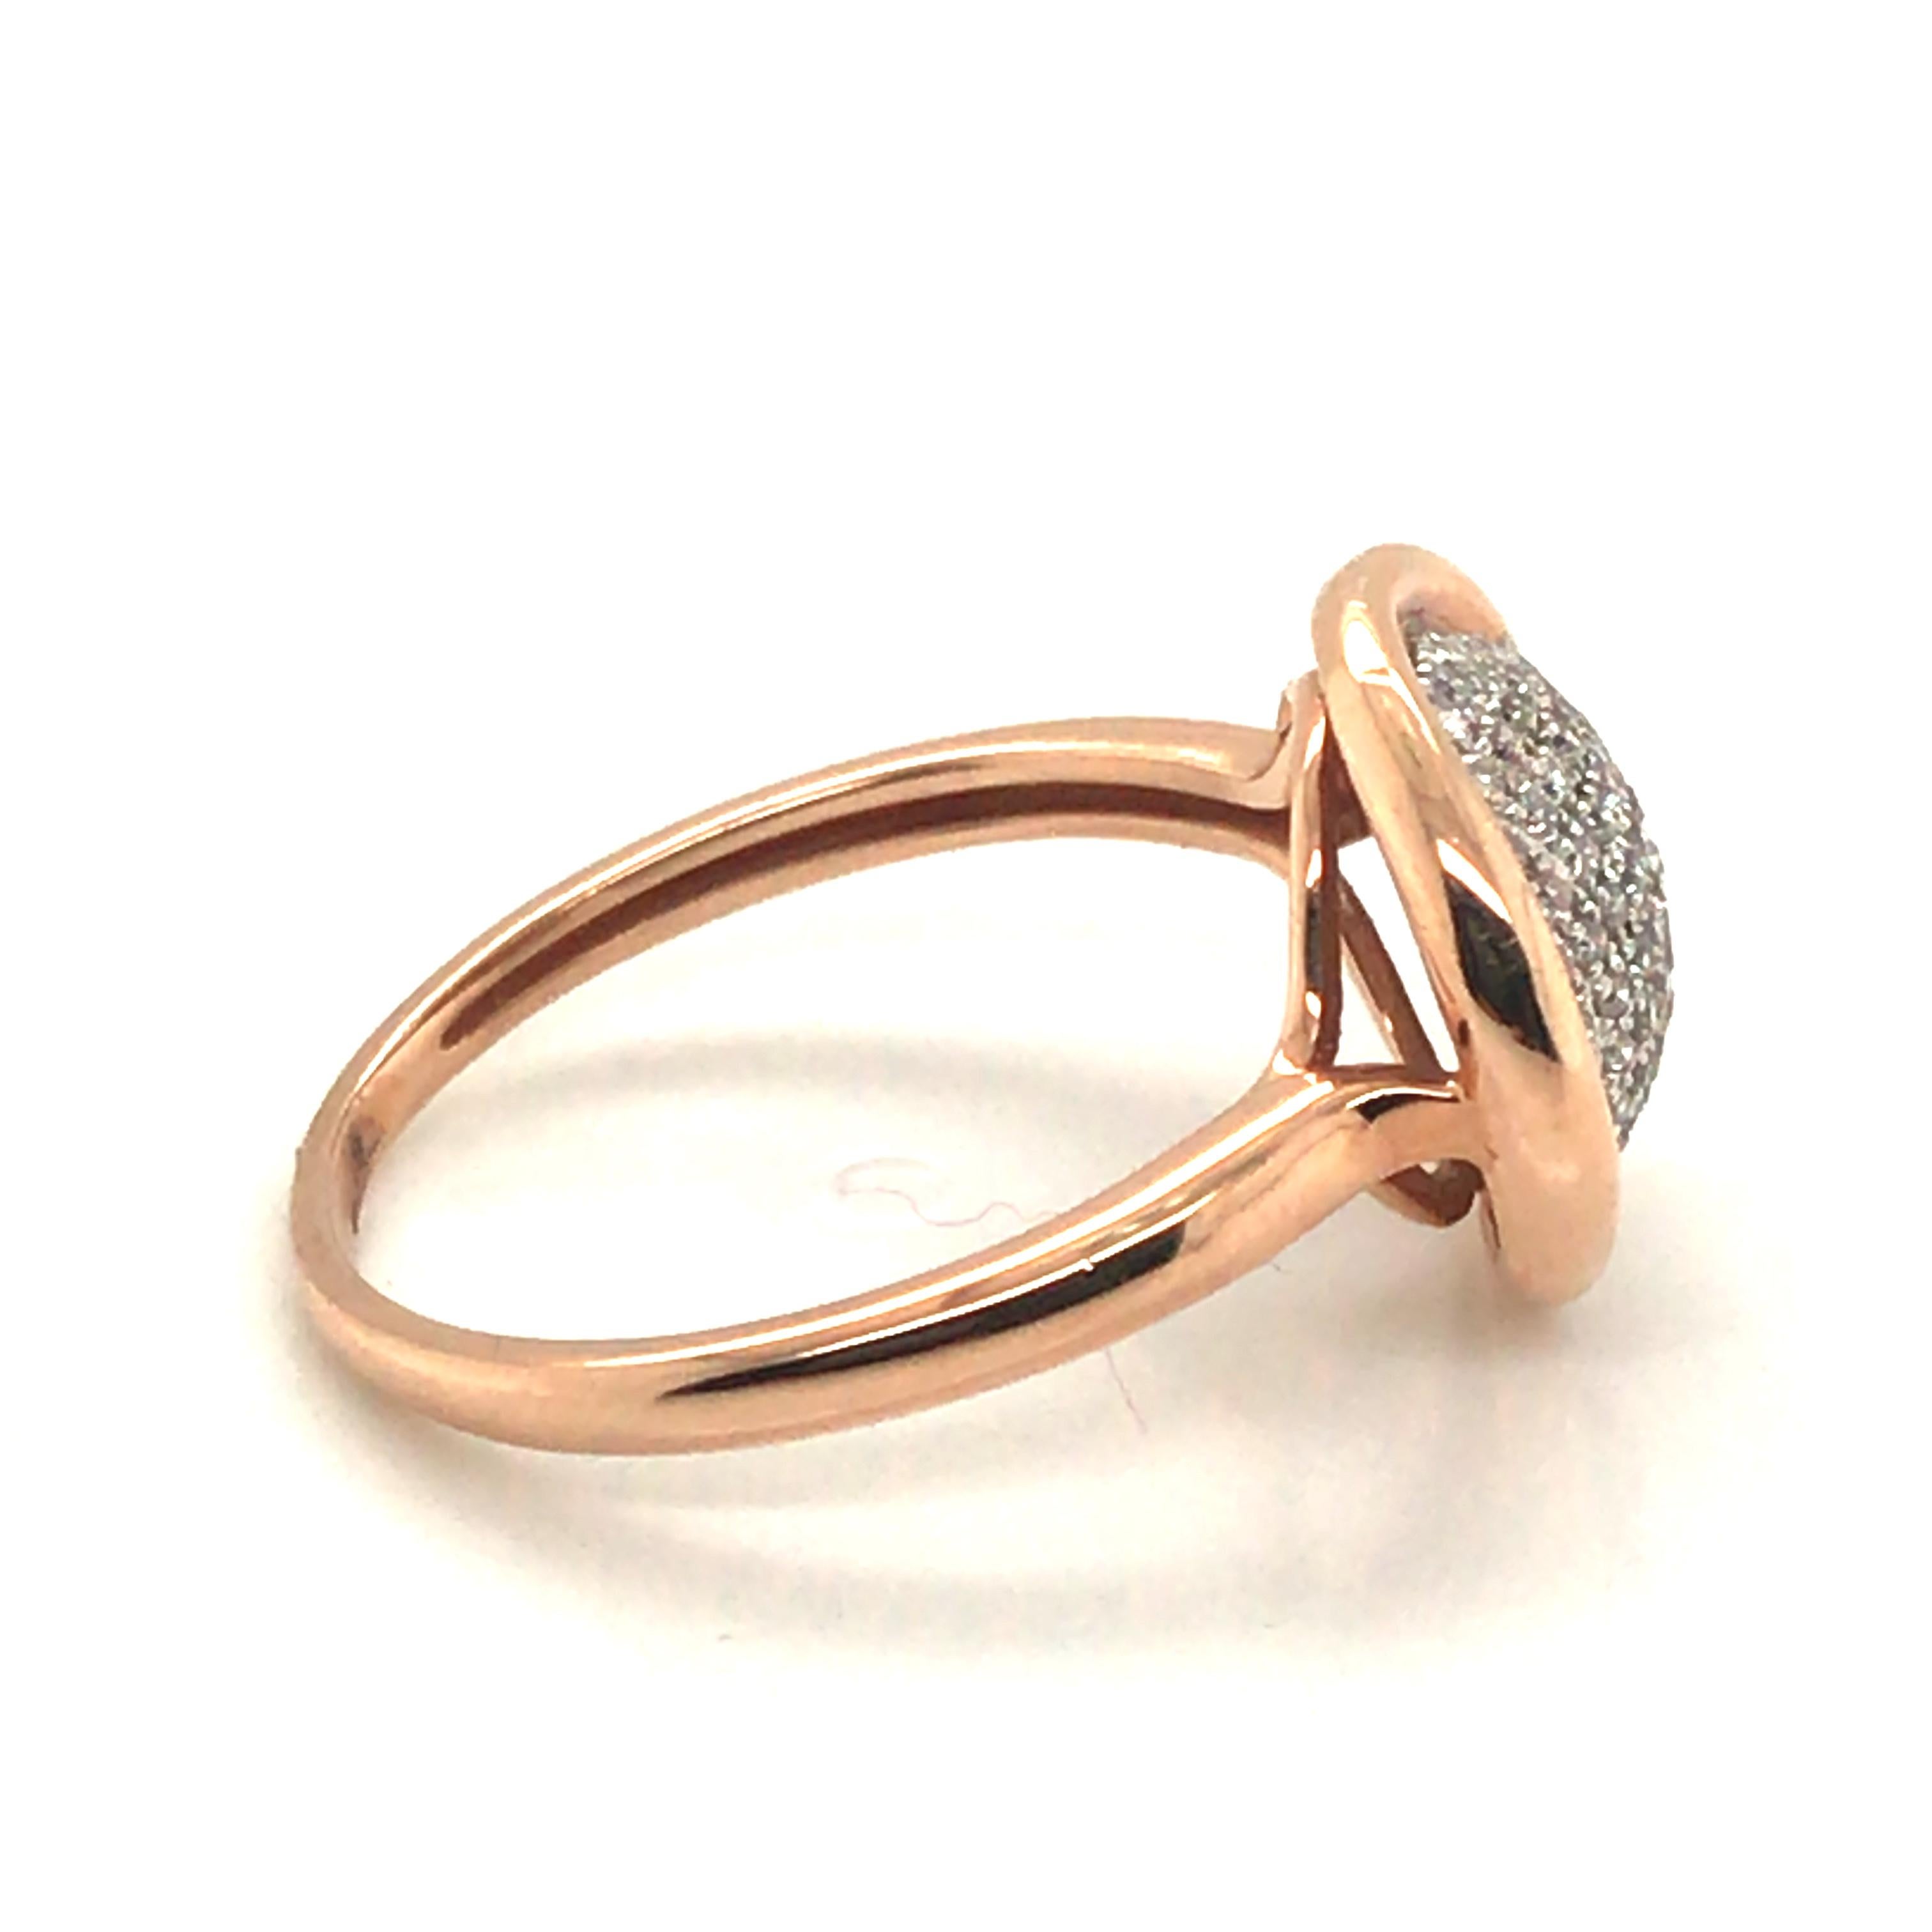 Check out our new Fashion Diamond Ring with 14 Karat Rose Gold

Round-Cut Diamond Weight: 0.25 Carats

Clarity Grade: SI1
Color Grade: G
Total Diamond Weight: 0.25 Carats
Polish and Symmetry: Very Good
Style Number: AV071DPG